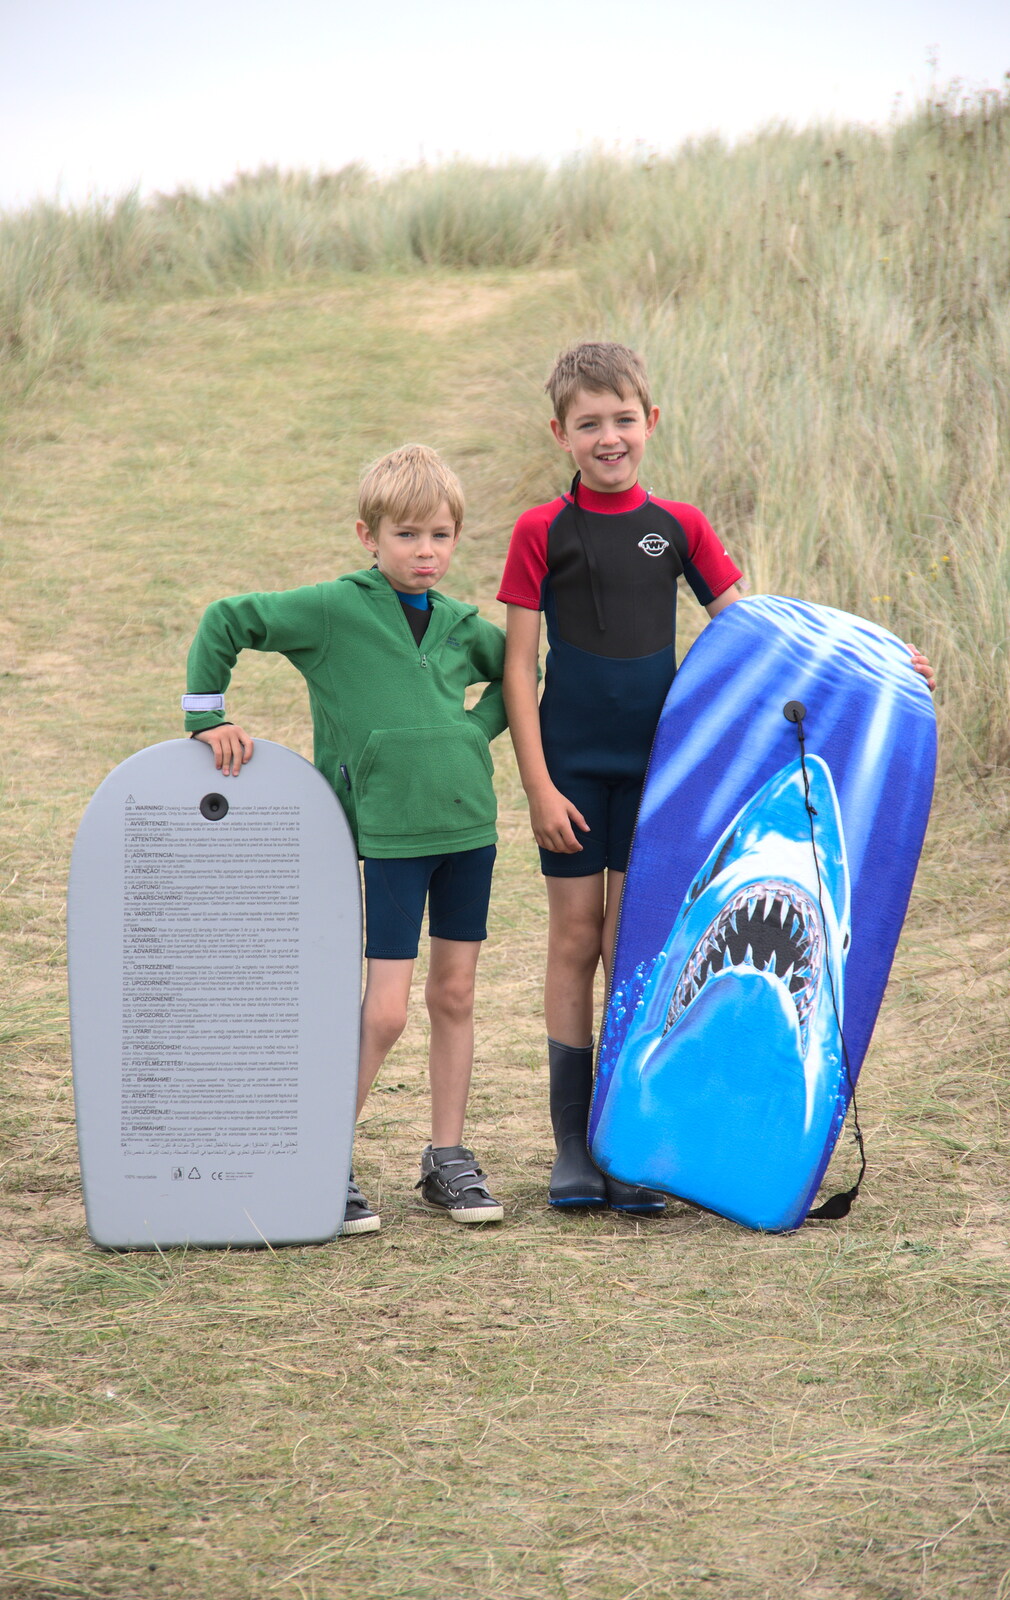 Harry and Fred pose in their Tesco wetsuits  from An Optimistic Camping Weekend, Waxham Sands, Norfolk - 22nd September 2018